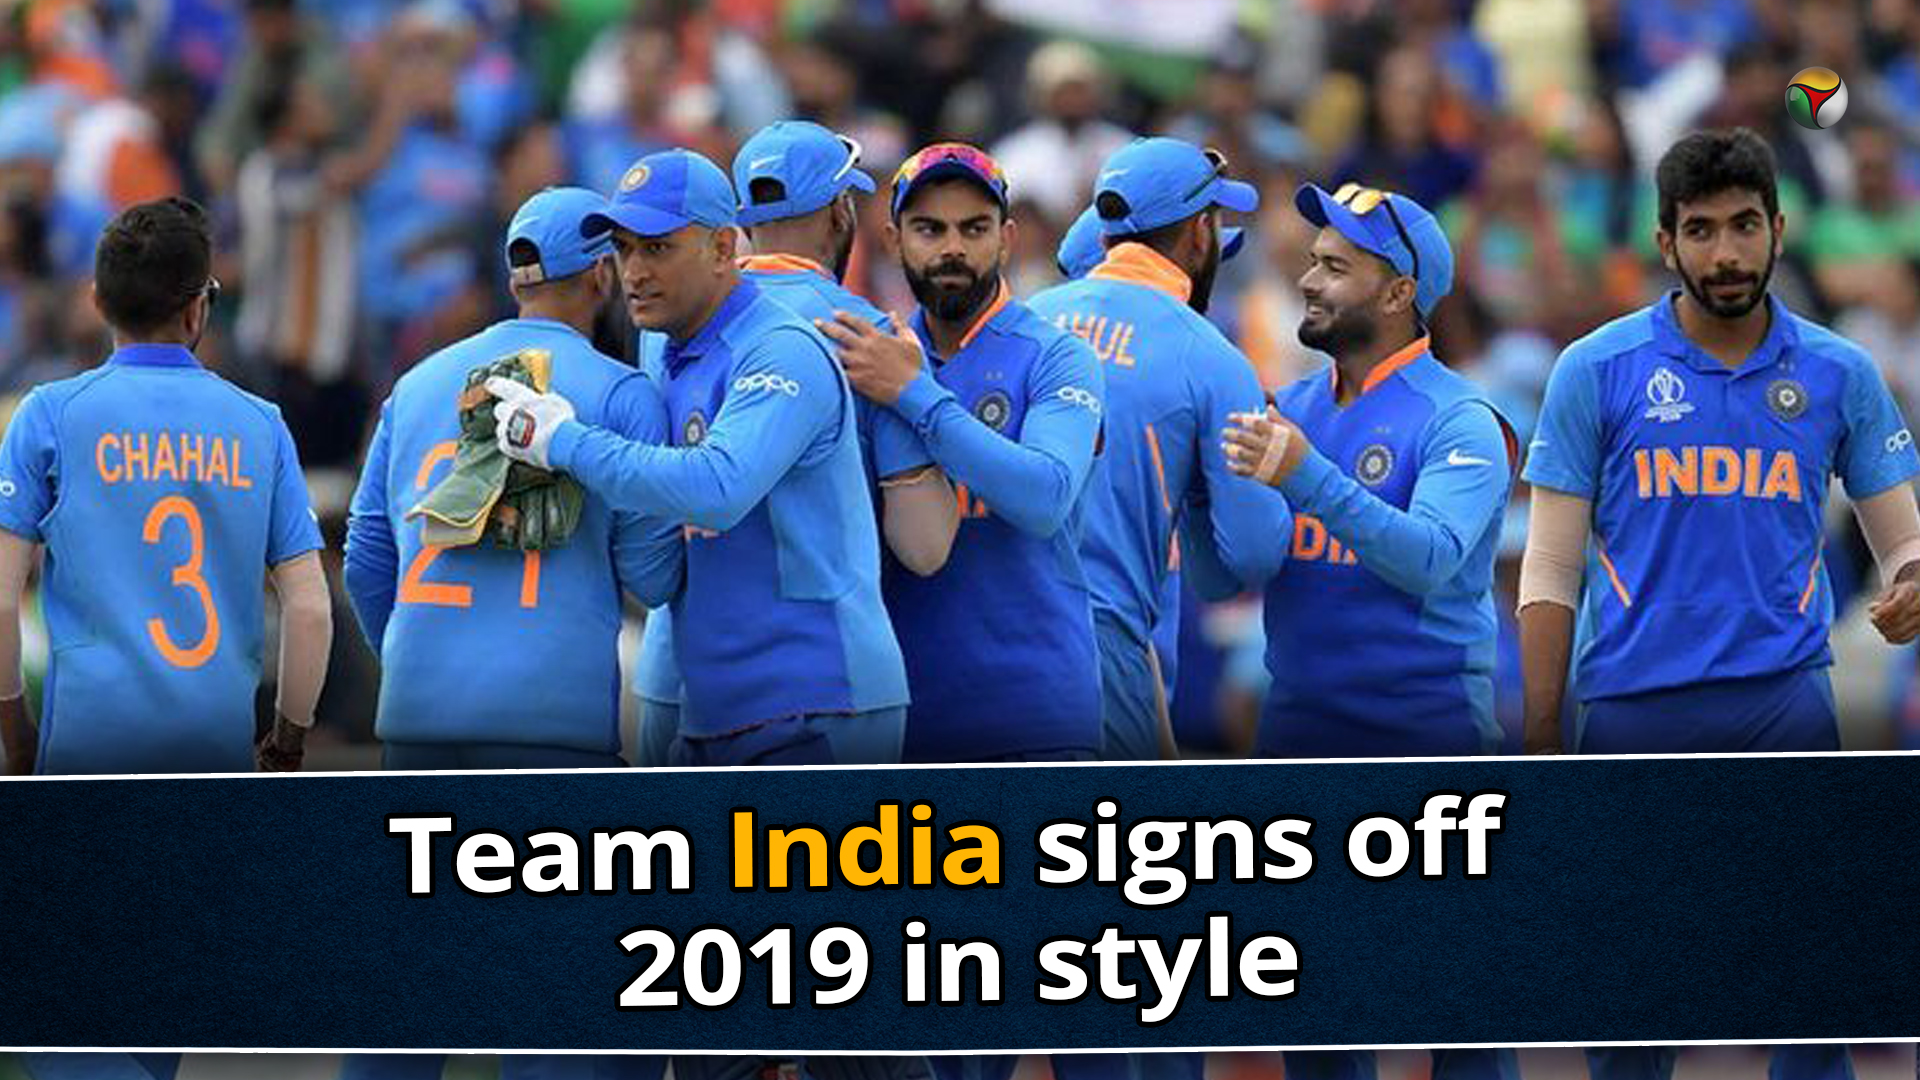 Team India signs off 2019 in style